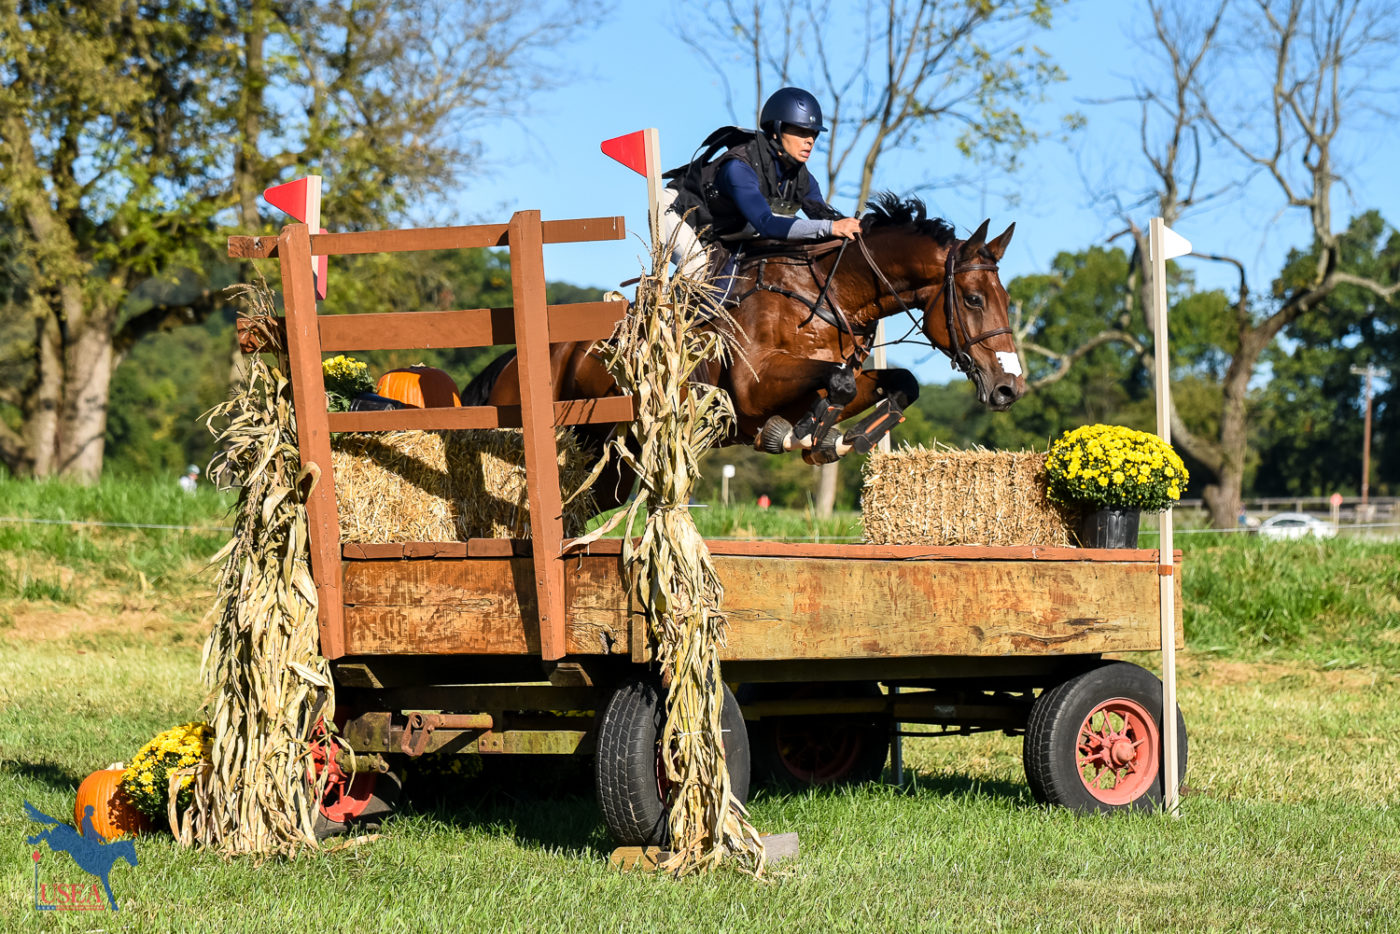 Courses were beautifully decorated with fall-themed decorations. USEA/Jessica Duffy Photo.